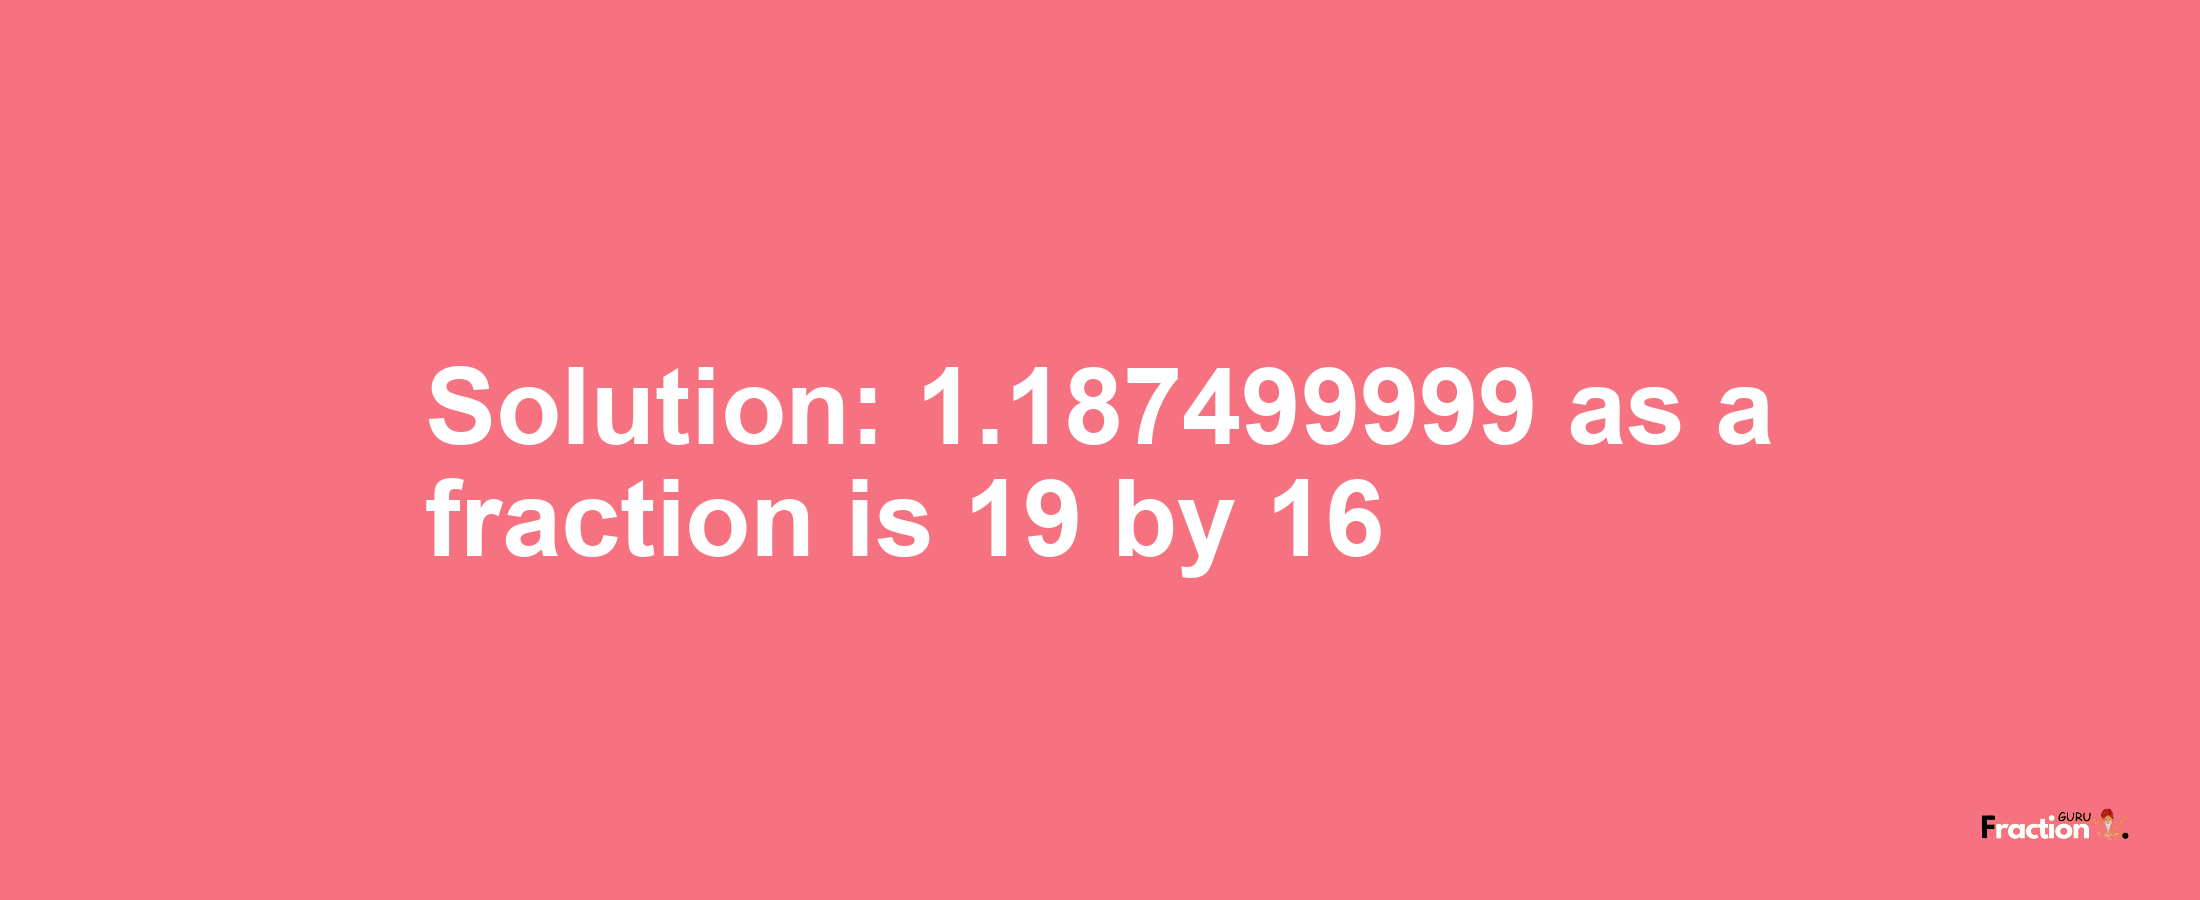 Solution:1.187499999 as a fraction is 19/16